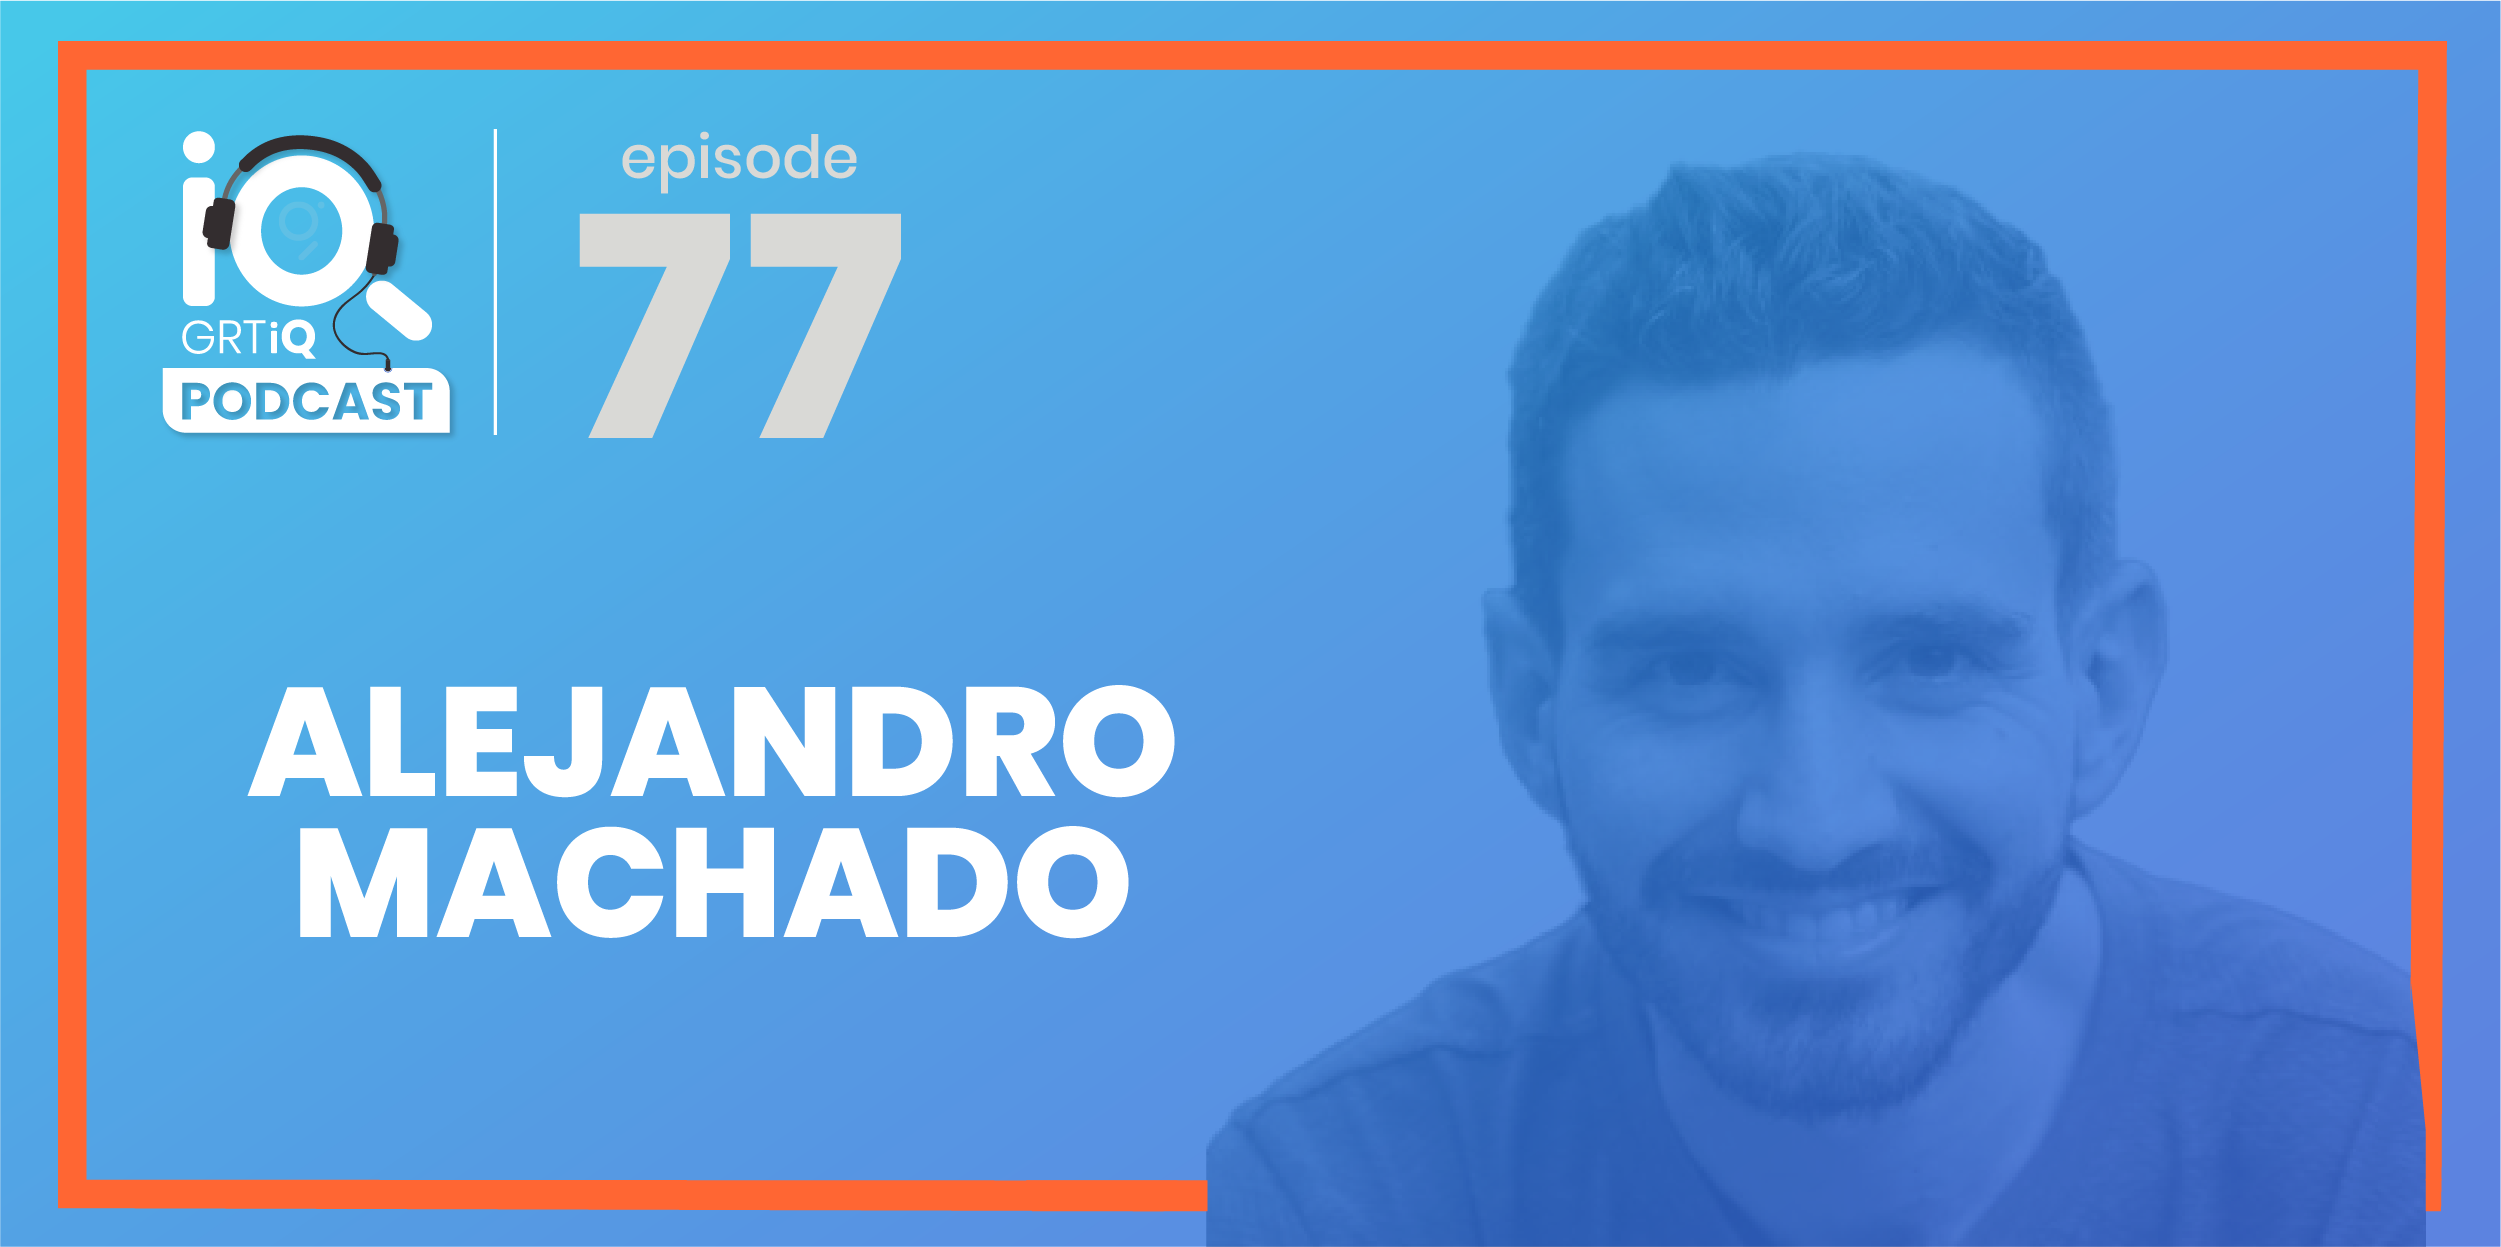 Alejandro Machado, Product Strategist at Bitrefill. When I was introduced to Alejandro, I was told that he is someone who not only has a unique perspective on crypto and its potential impact on the world, but he’s working on solutions to make it happen. Alejandro is Co-founder at the Open Money Initiative, an organization dedicated to researching perception, product, and policy related to digital money. And he recently joined the team at Bitrefill, the world’s largest crypto-only e-commerce site.